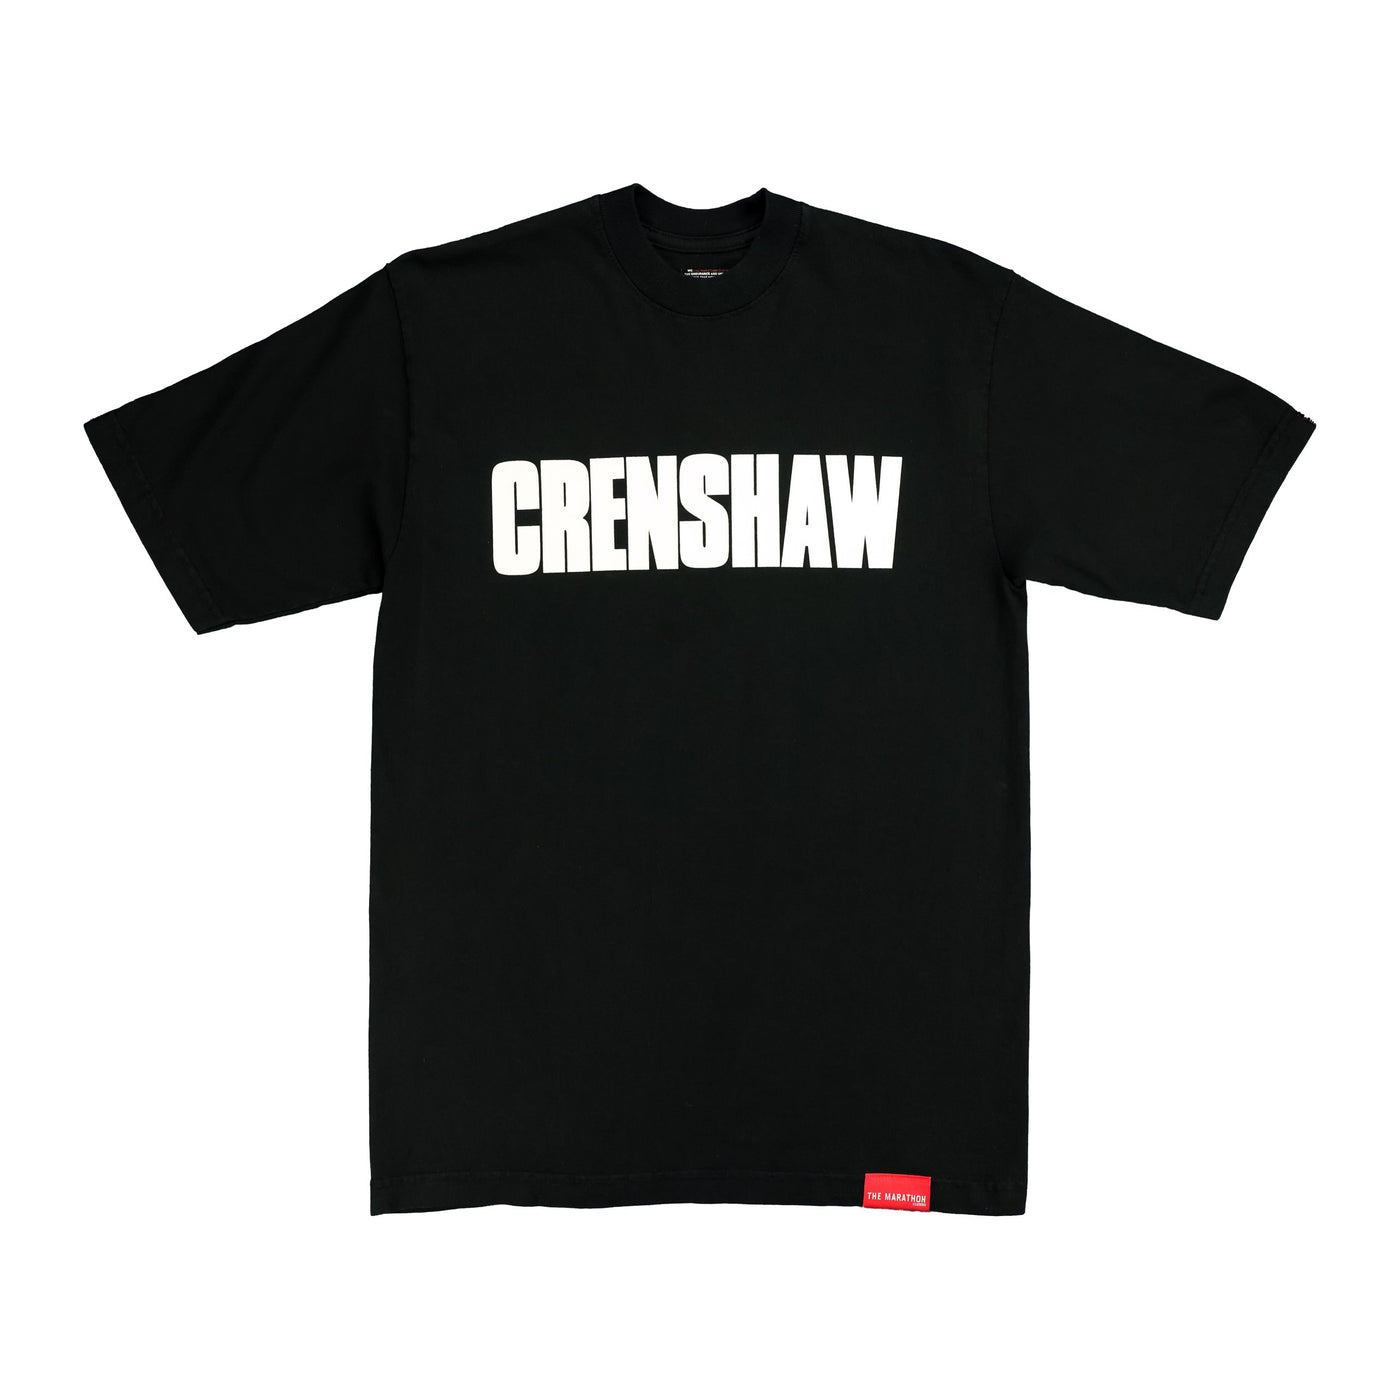 Limited Edition 91 Crenshaw T-Shirt - Black/White - Front